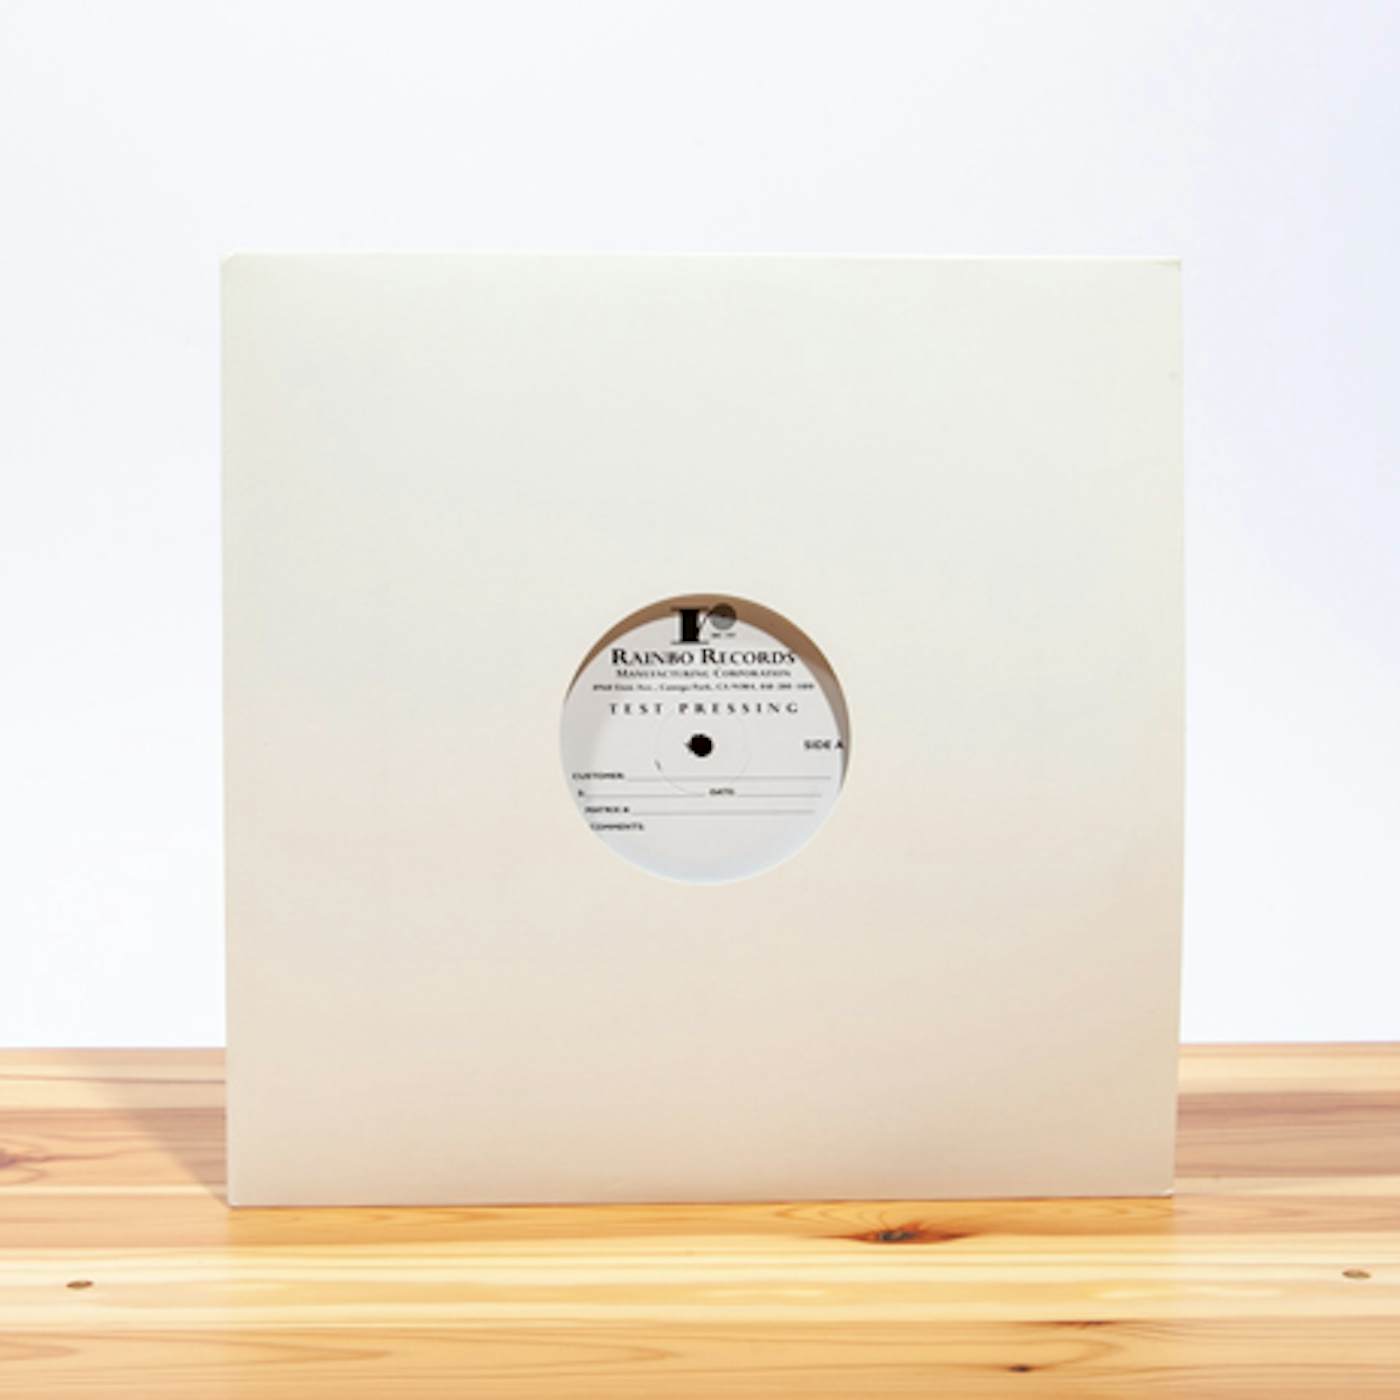 Rainer Maria A Better Version of Me (Test Pressing)